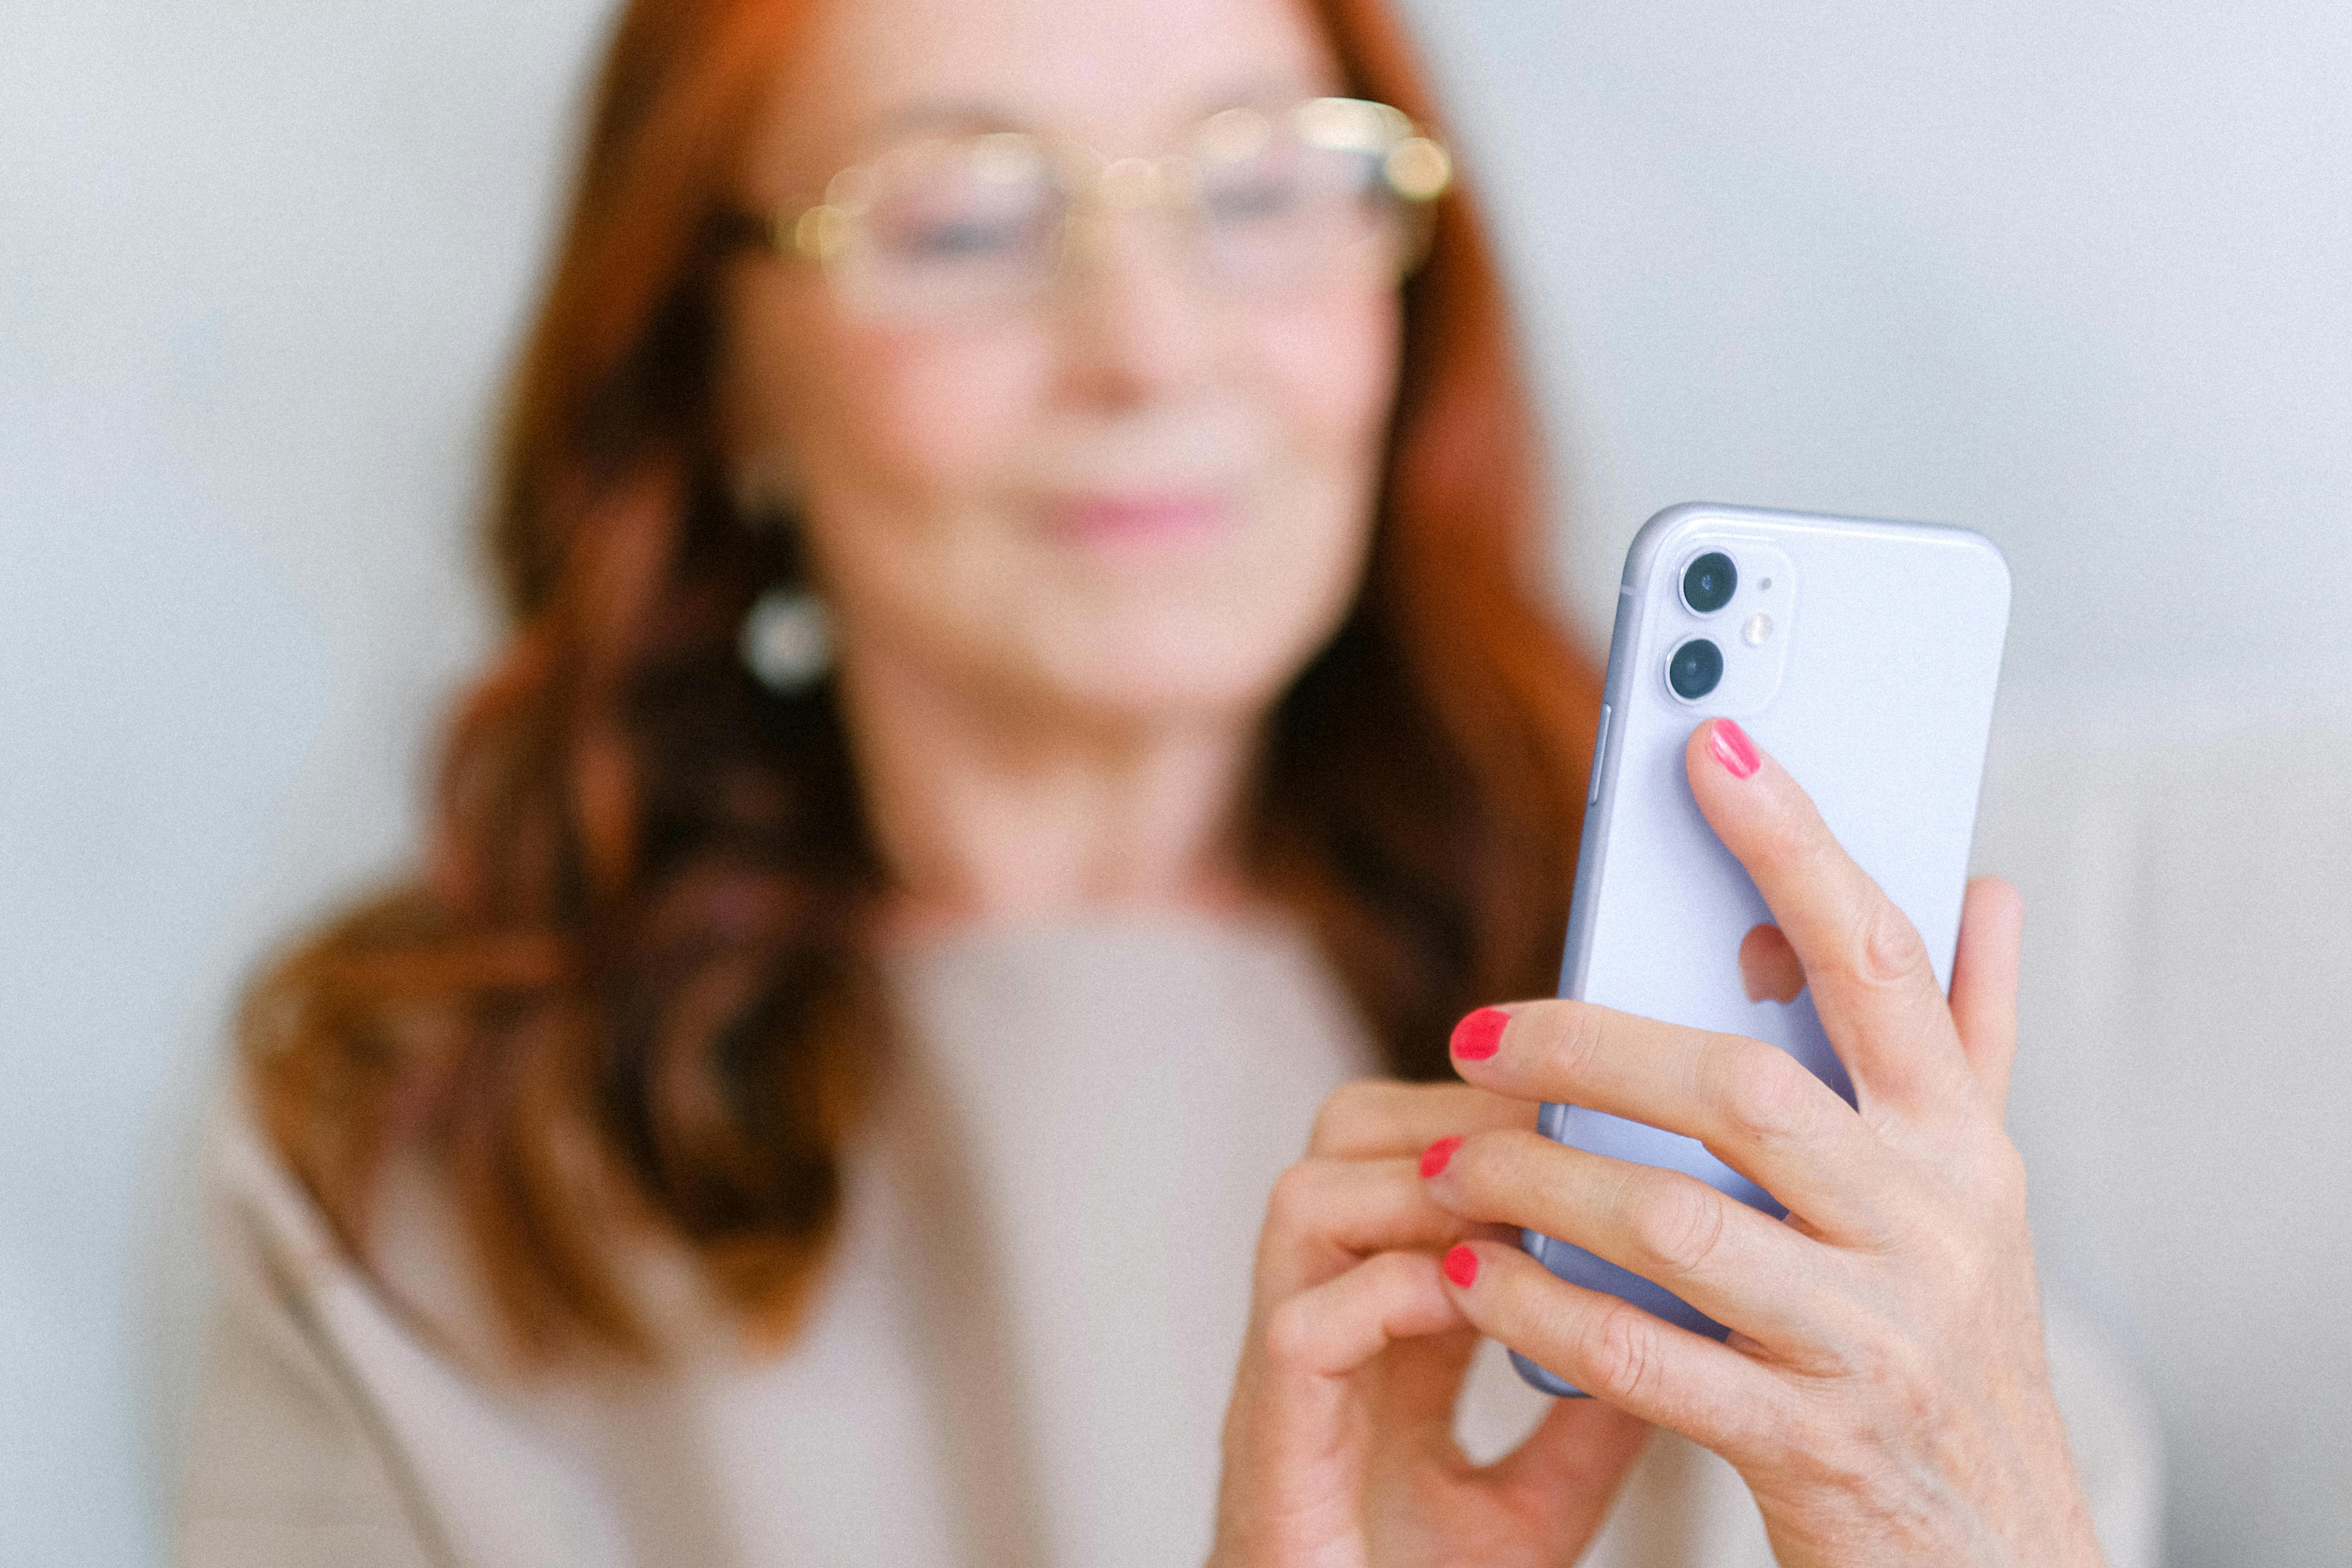 A woman smiling while holding a phone | Source: Pexels